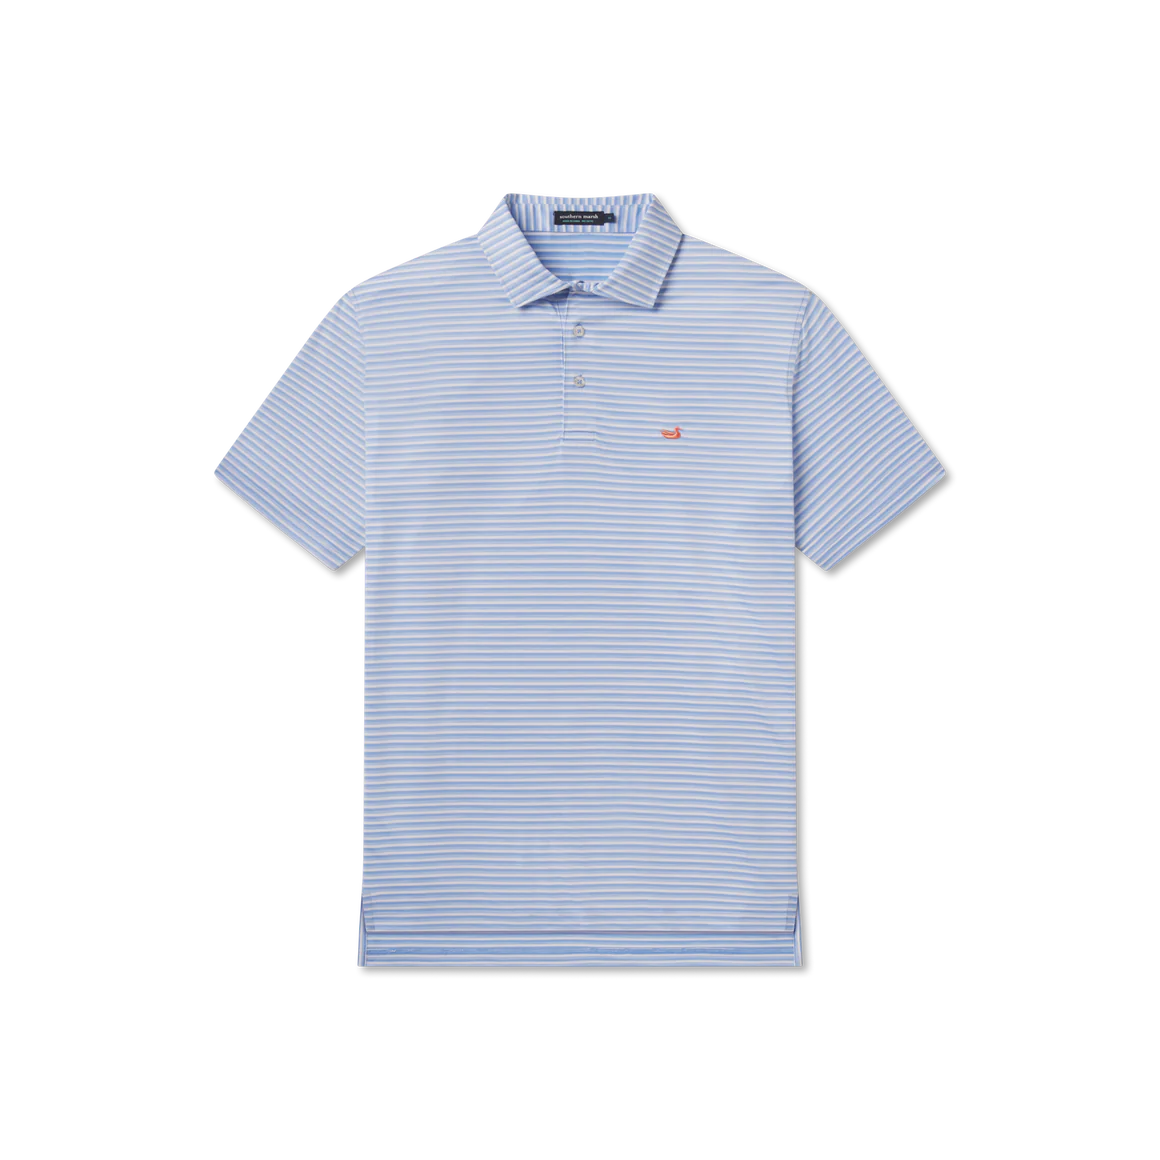 Bermuda Domingo Stripe Performance Polo in Lilac by Southern Marsh